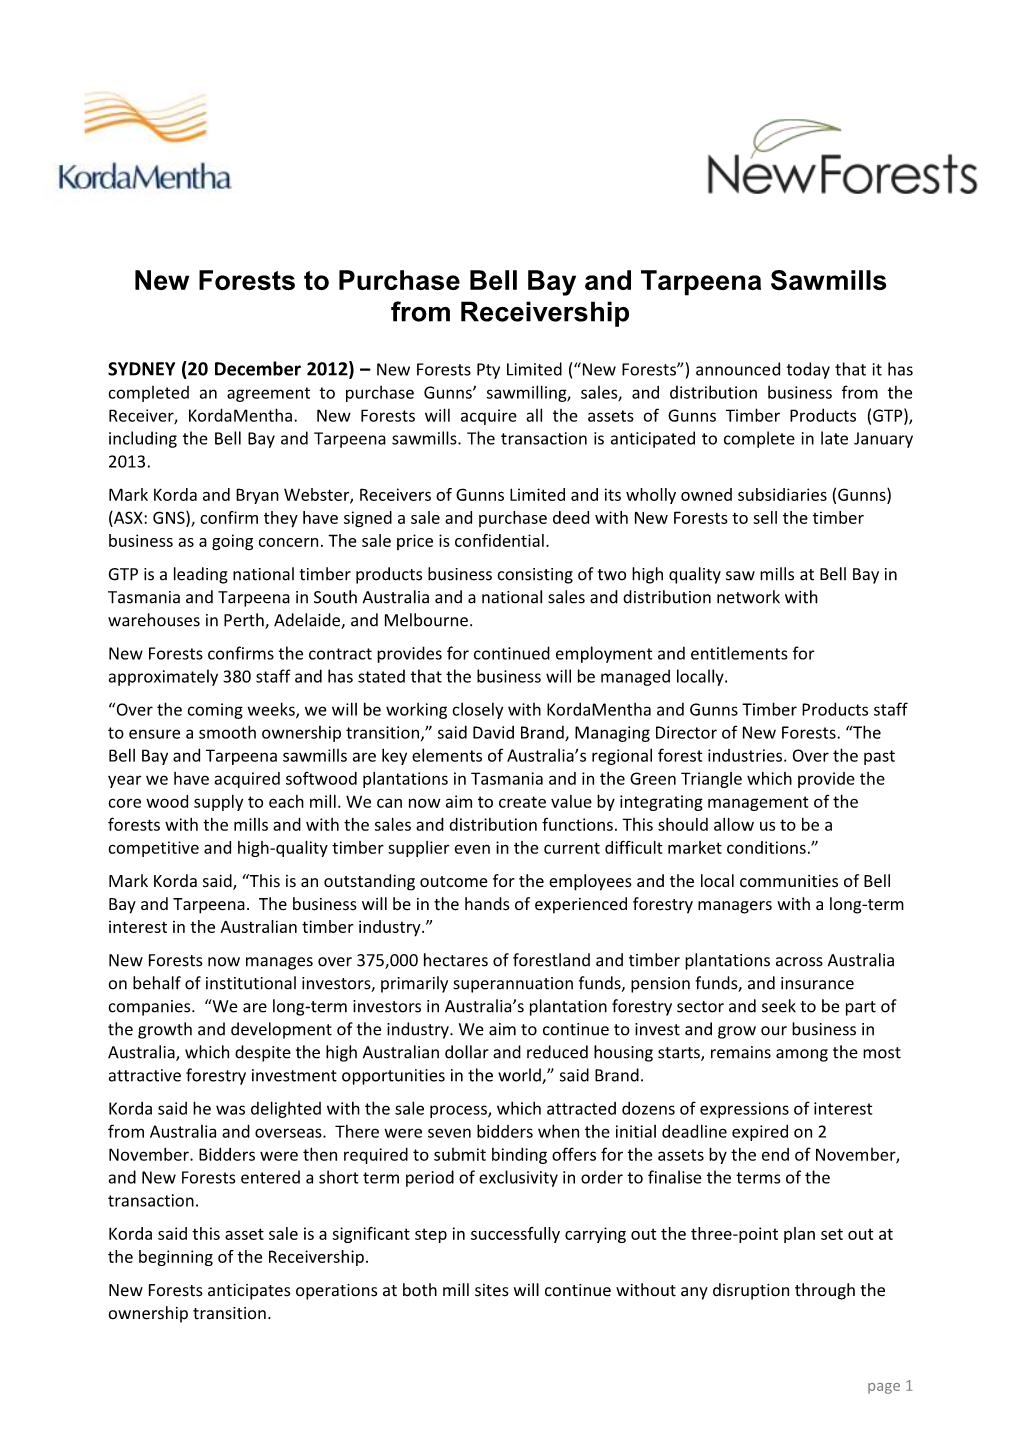 New Forests to Purchase Bell Bay and Tarpeena Sawmills from Receivership